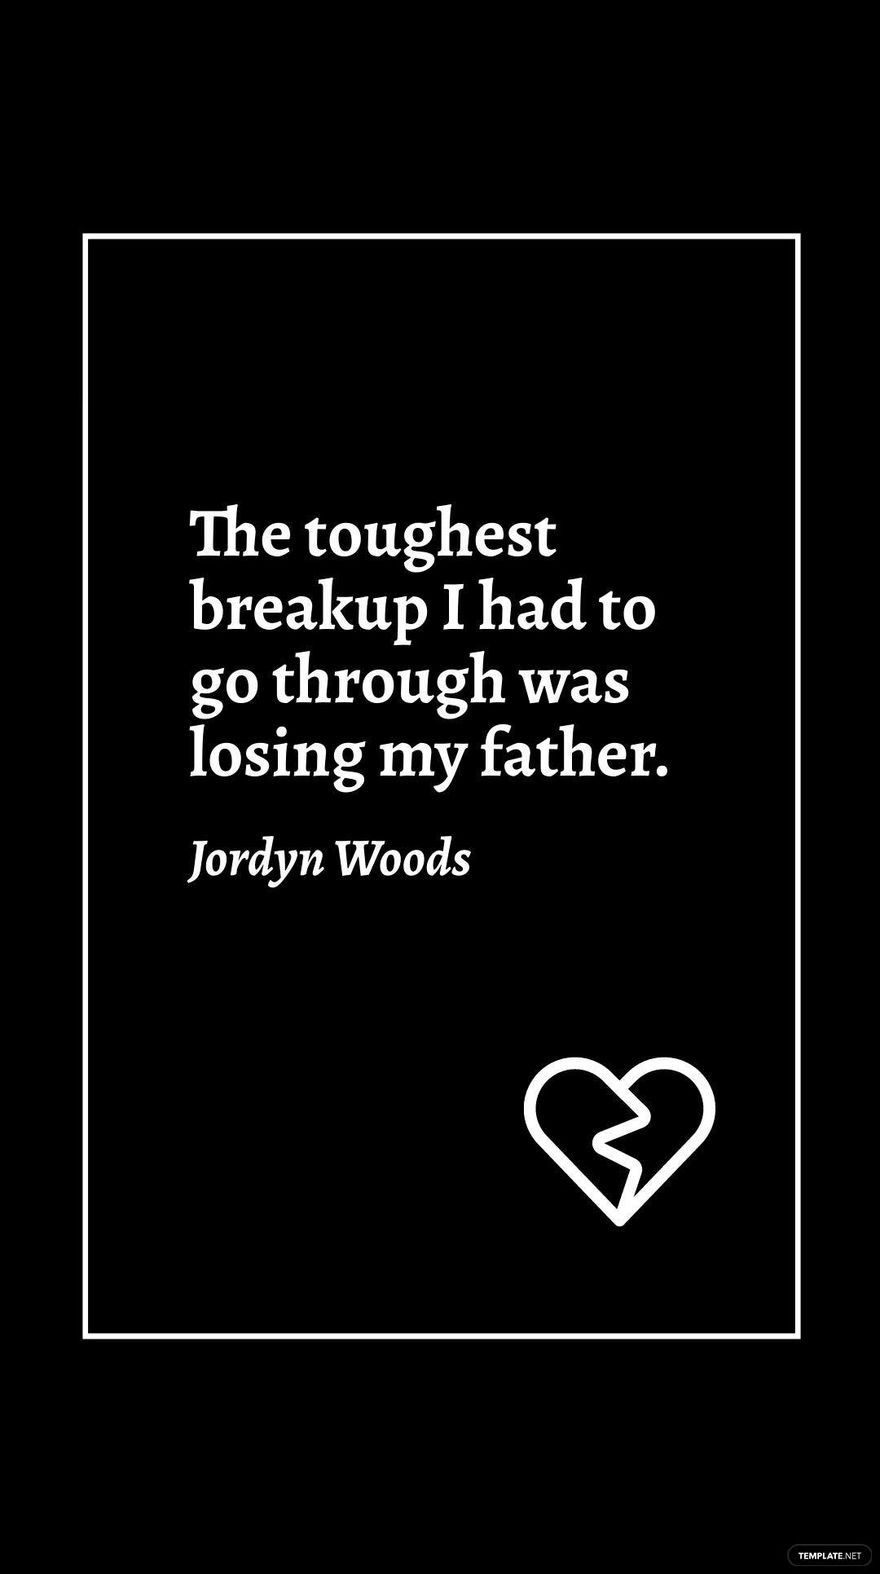 Jordyn Woods - The toughest breakup I had to go through was losing my father. in JPG